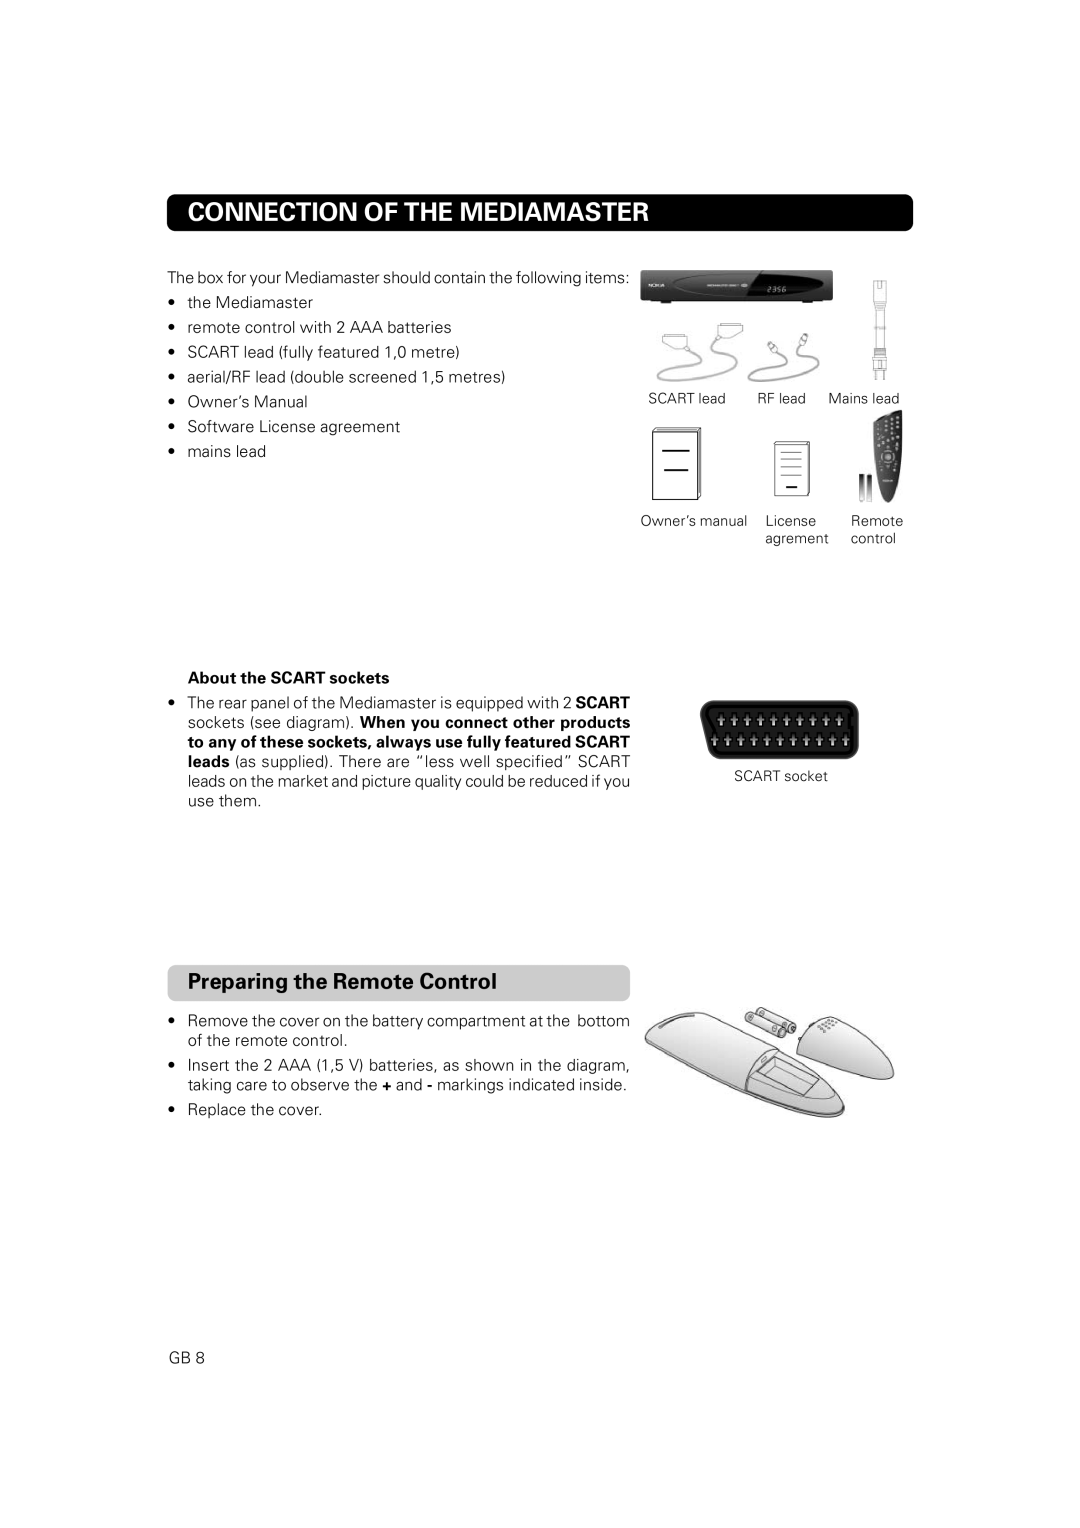 Nokia 9828 owner manual Connection Of The Mediamaster, Preparing the Remote Control, About the SCART sockets 